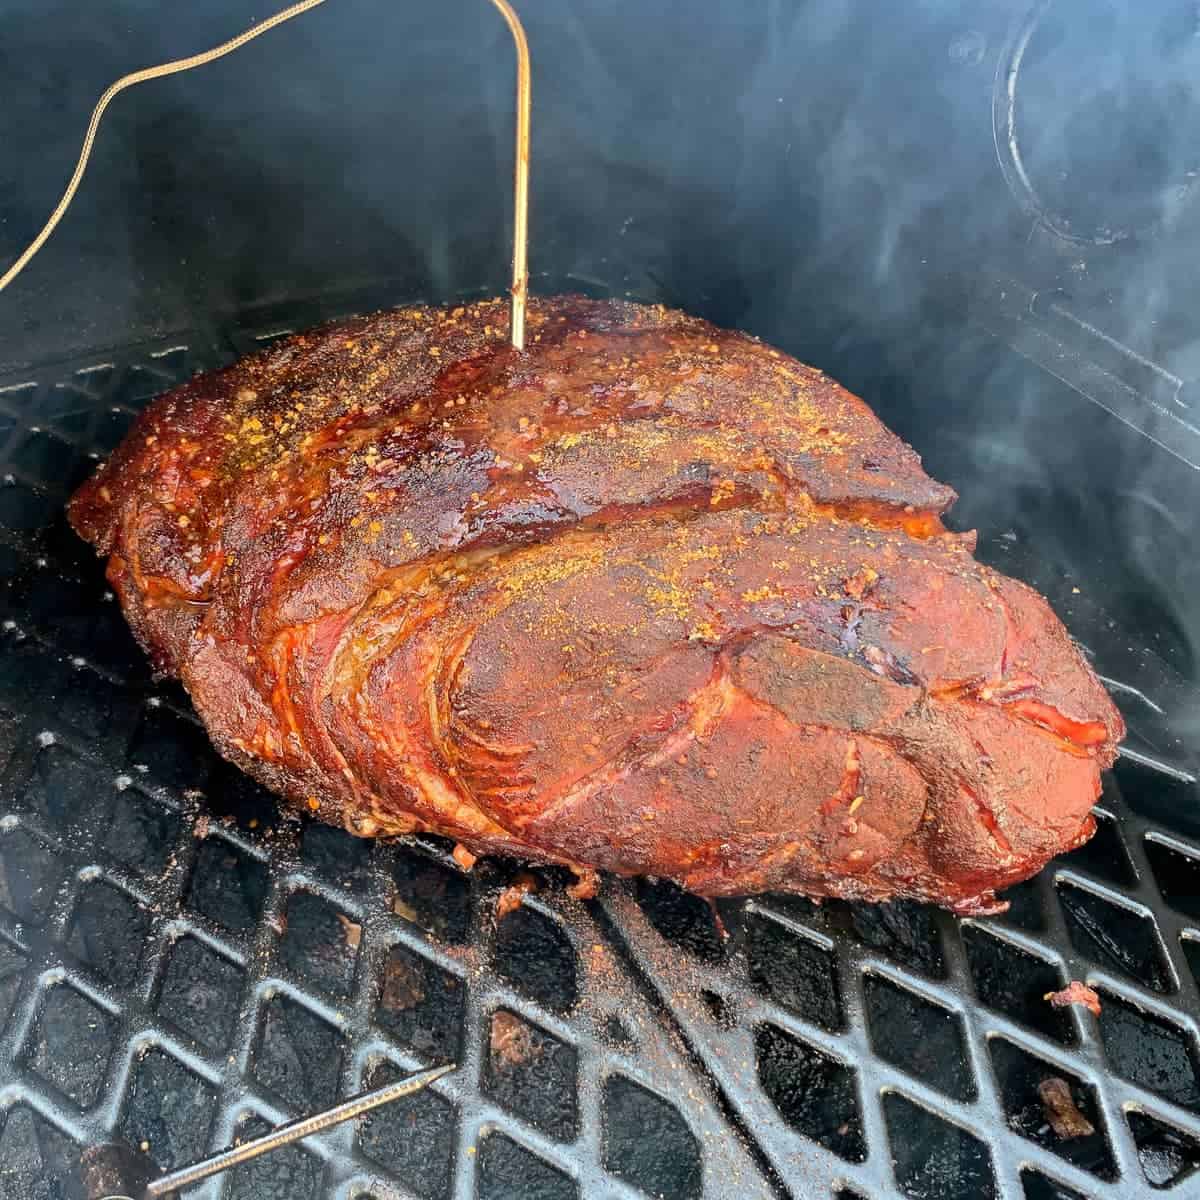 Pit Boss Smoked Pulled Pork